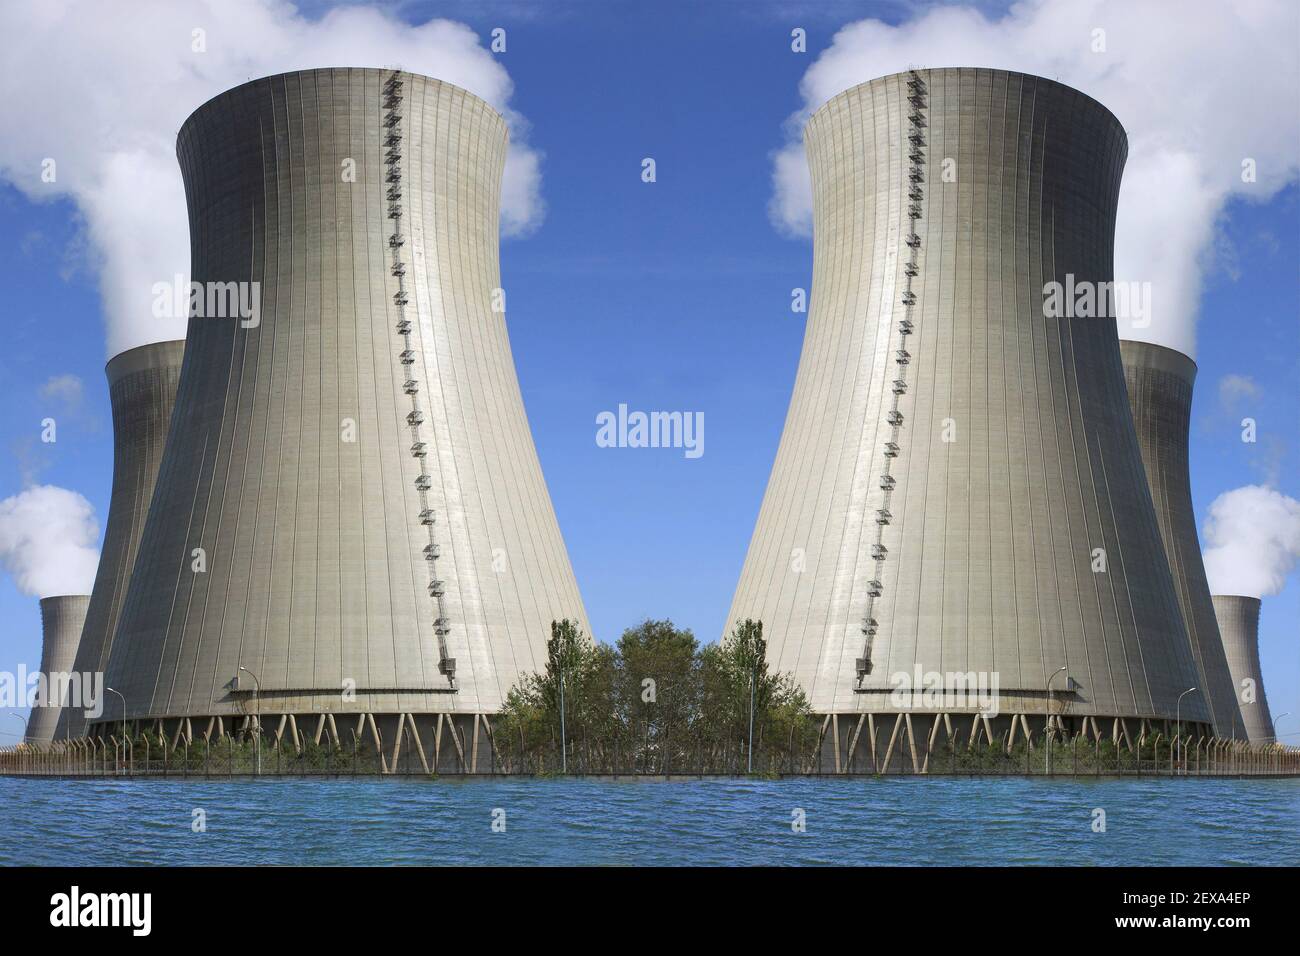 Nuclear Stock Photo